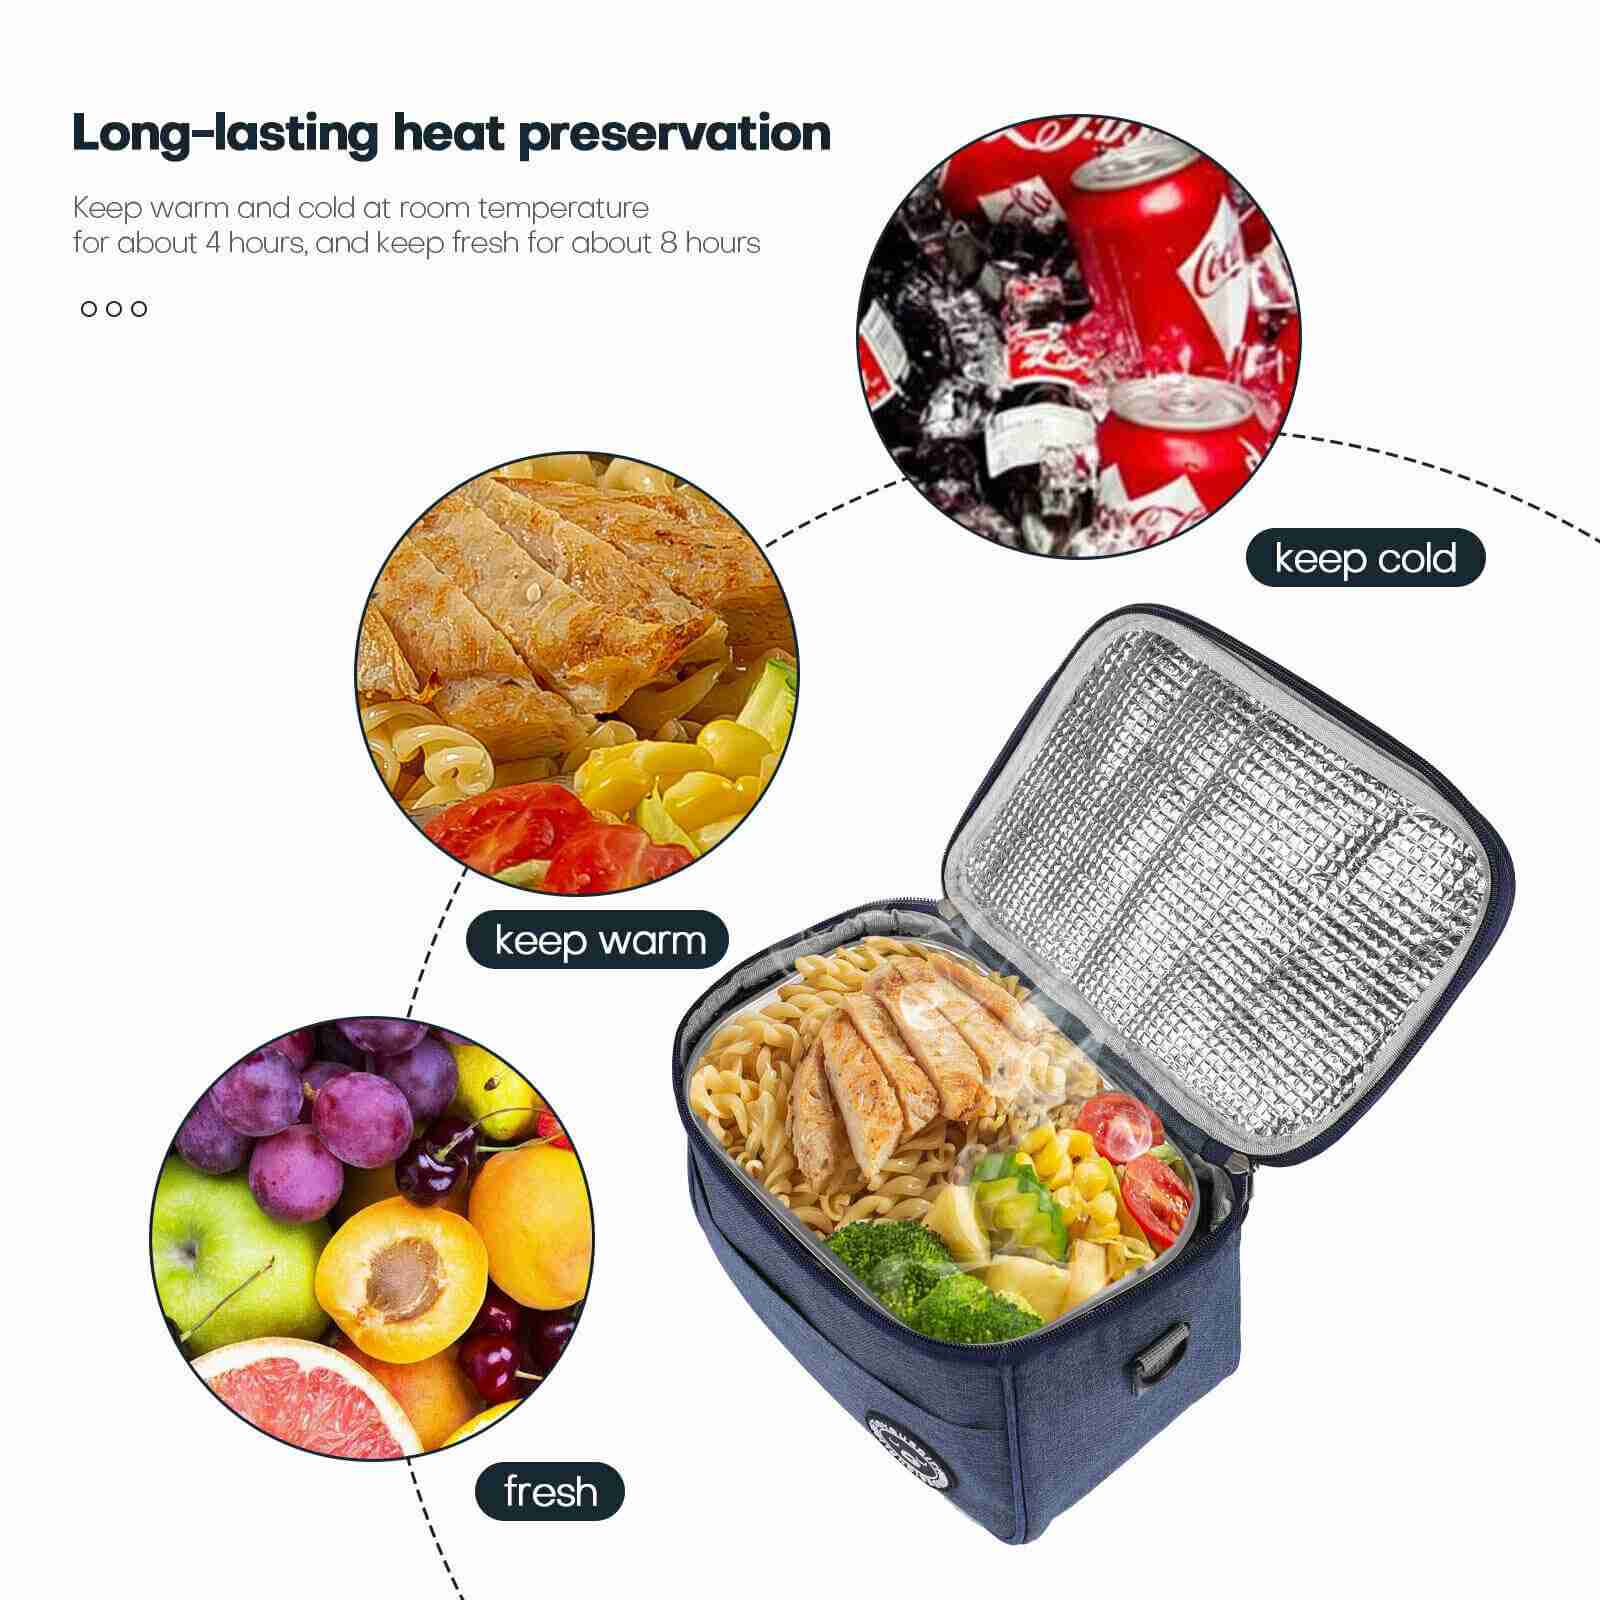 Portable Food Warmer School Kids Lunch Box Thermal Insulated Food